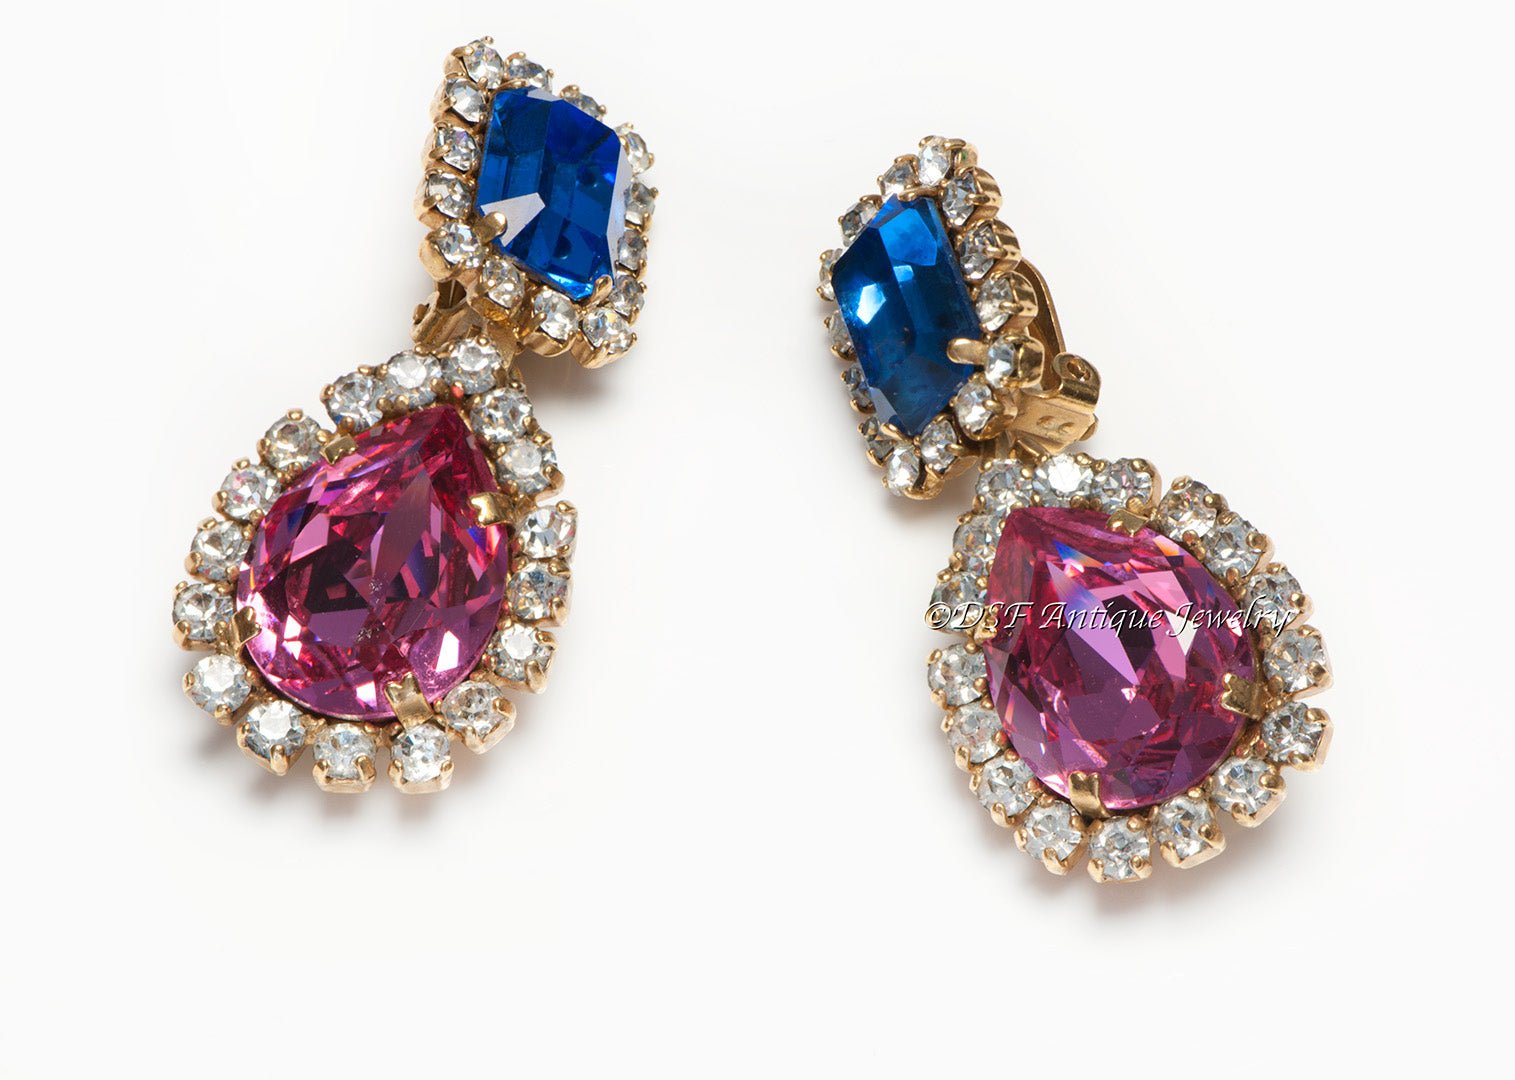 Chanel Paris Spring 1995 Barbie Collection Pink Blue Crystal Earrings - DSF Antique Jewelry